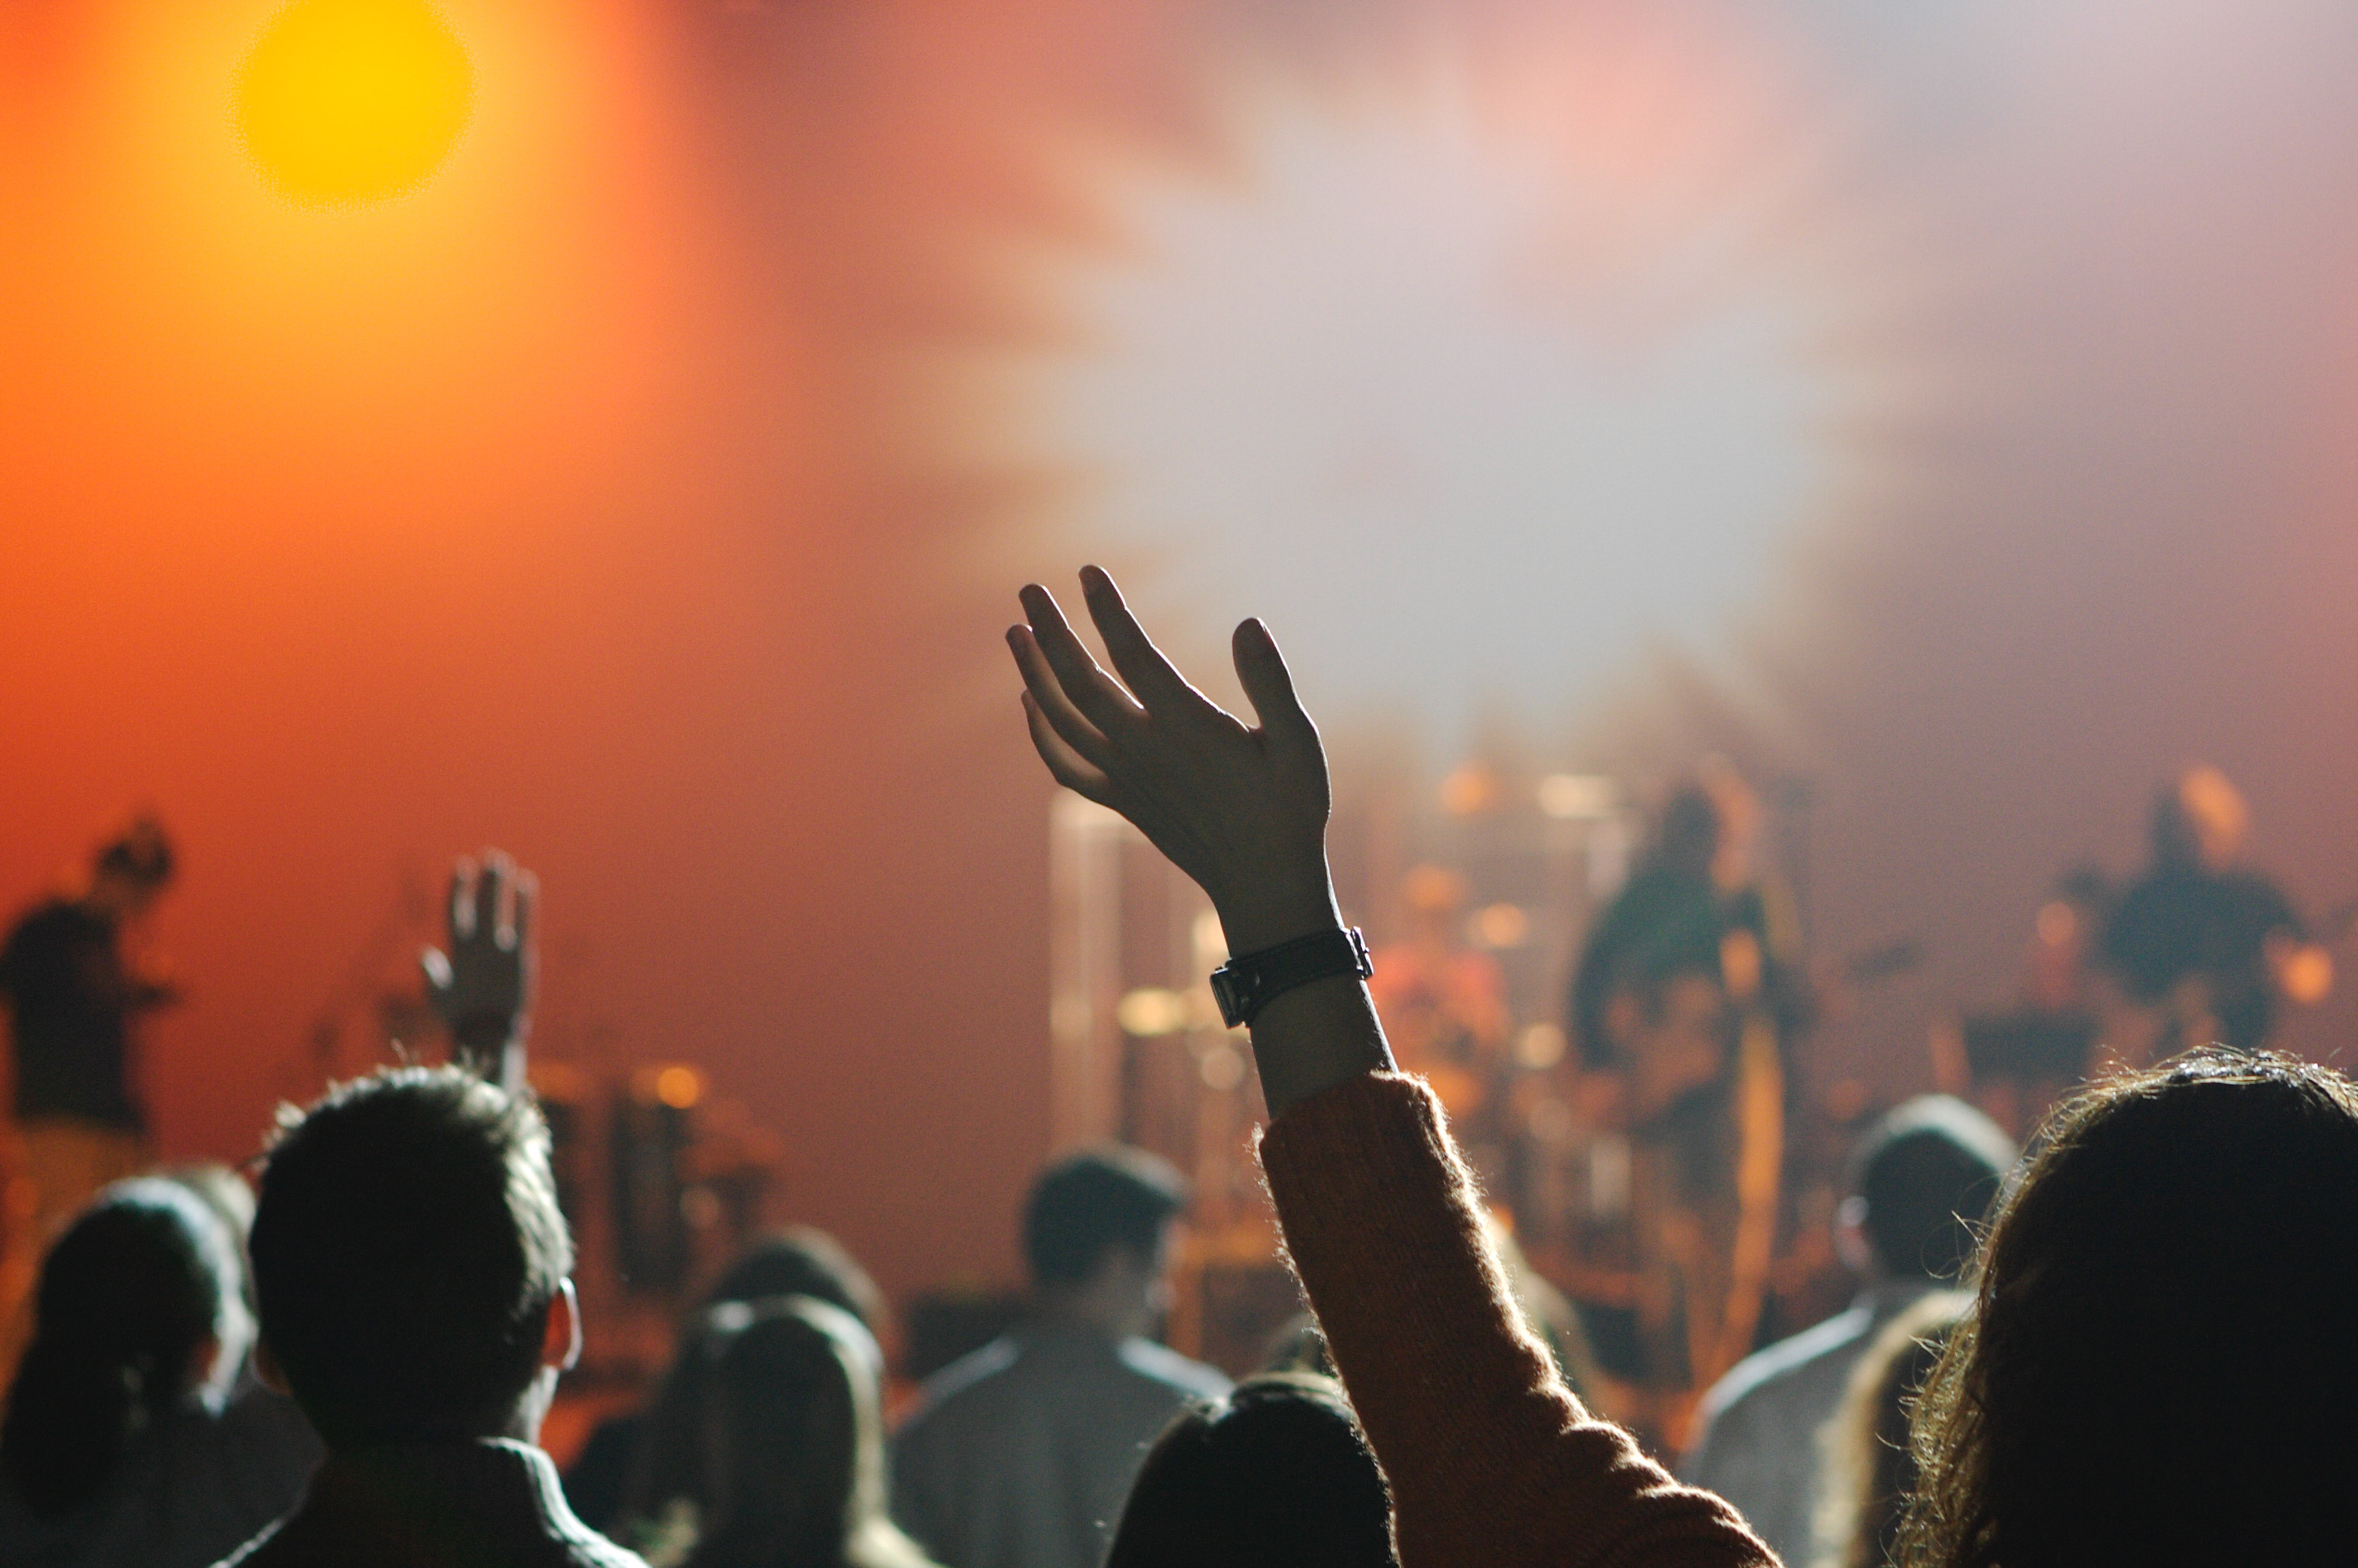 [Juiblee Colomn]Unfolding Praise: 1. The Meaning of Praise in Christian Worship